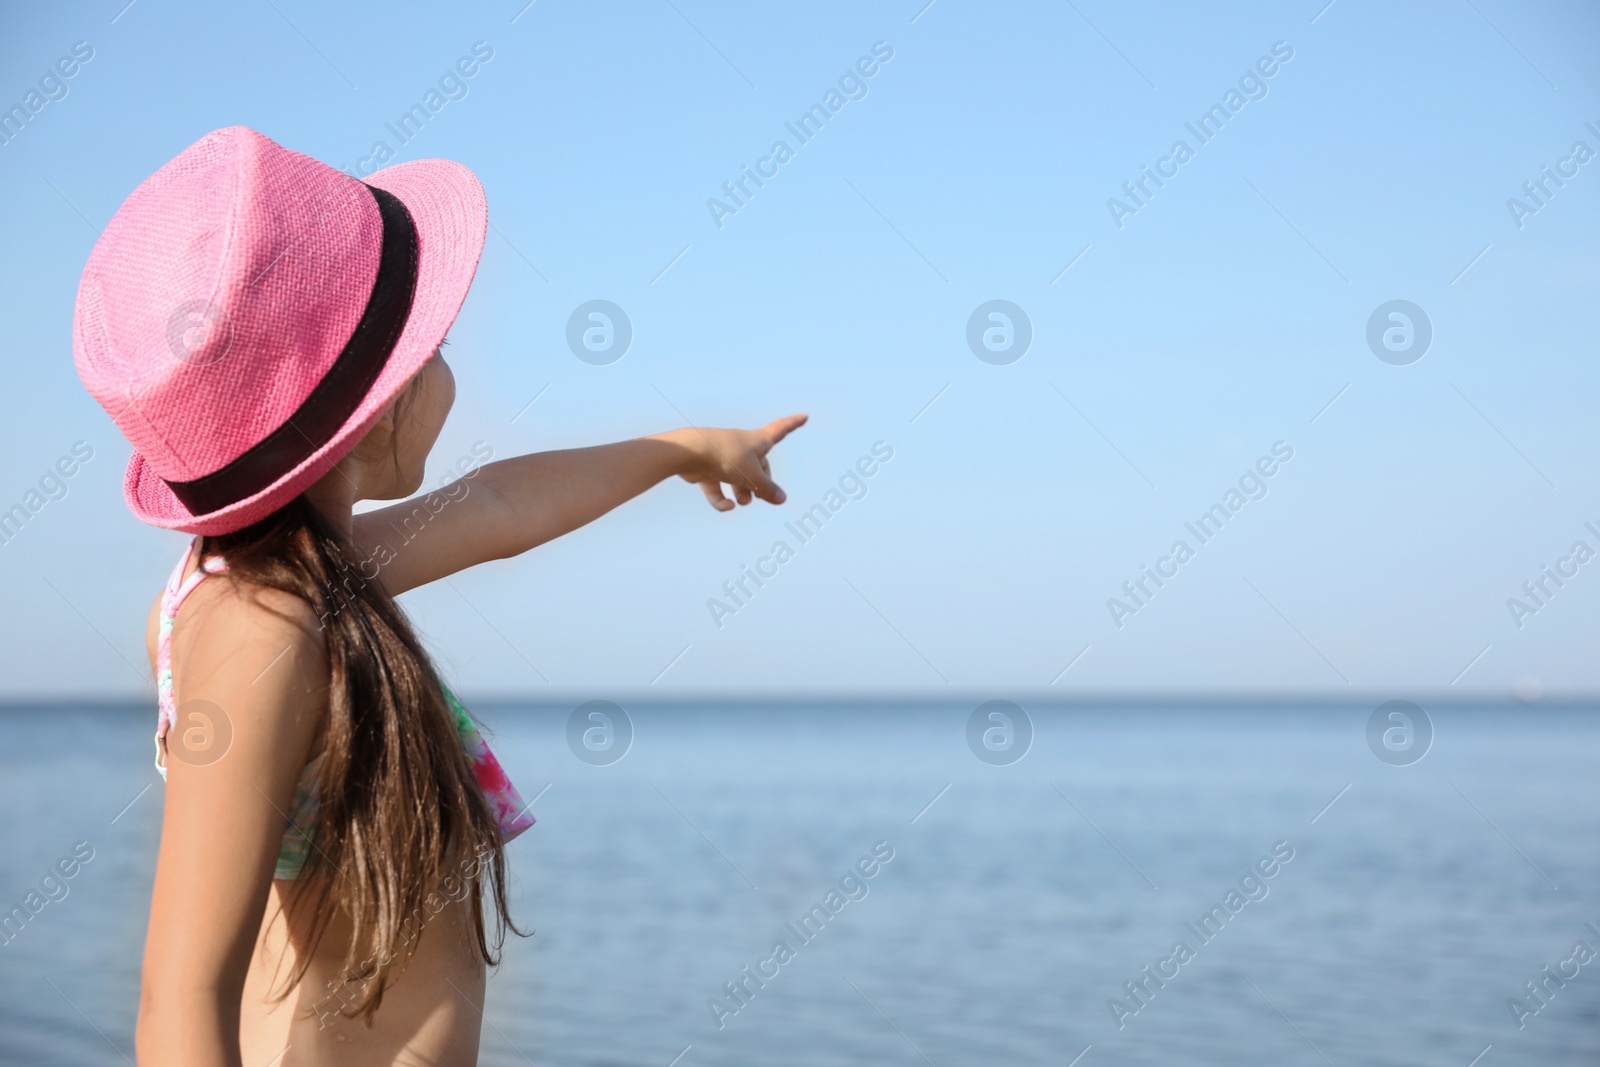 Photo of Cute little child pointing at something in sky. Beach holiday